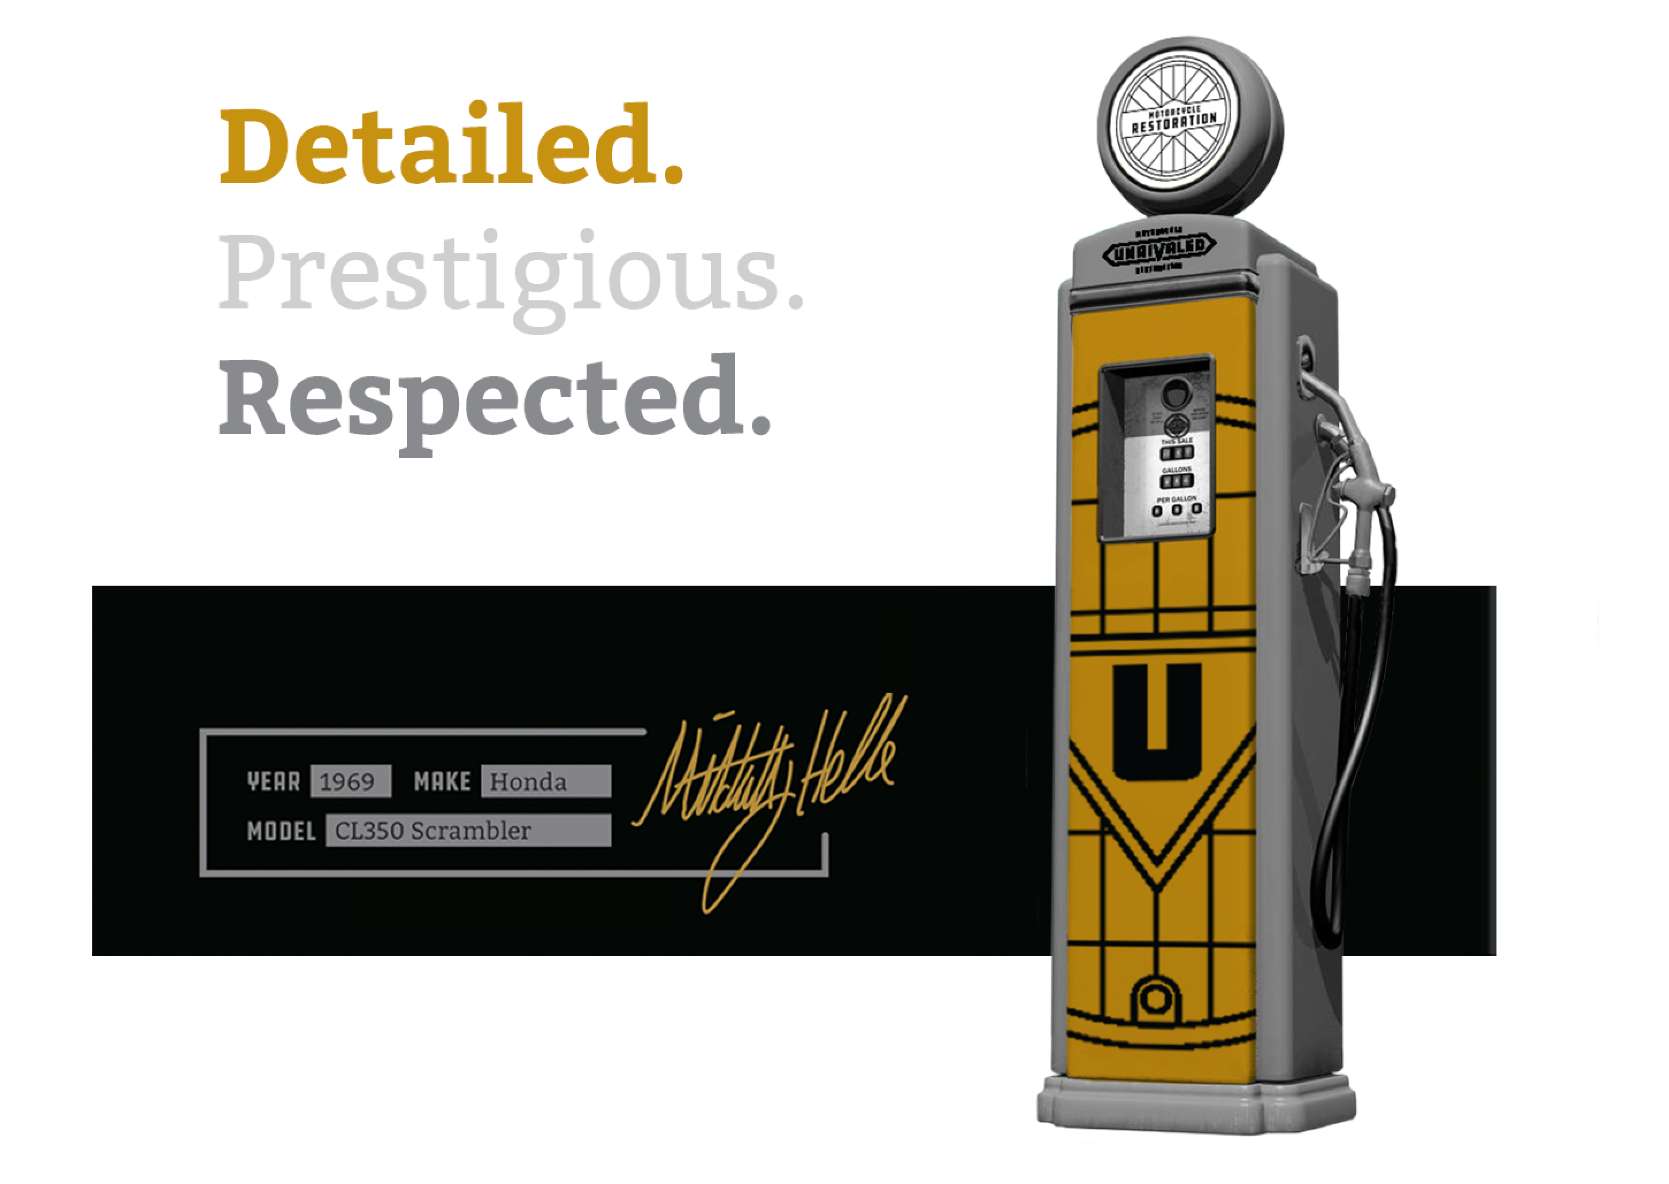 Unrivaled gas pump and nameplate illustrations